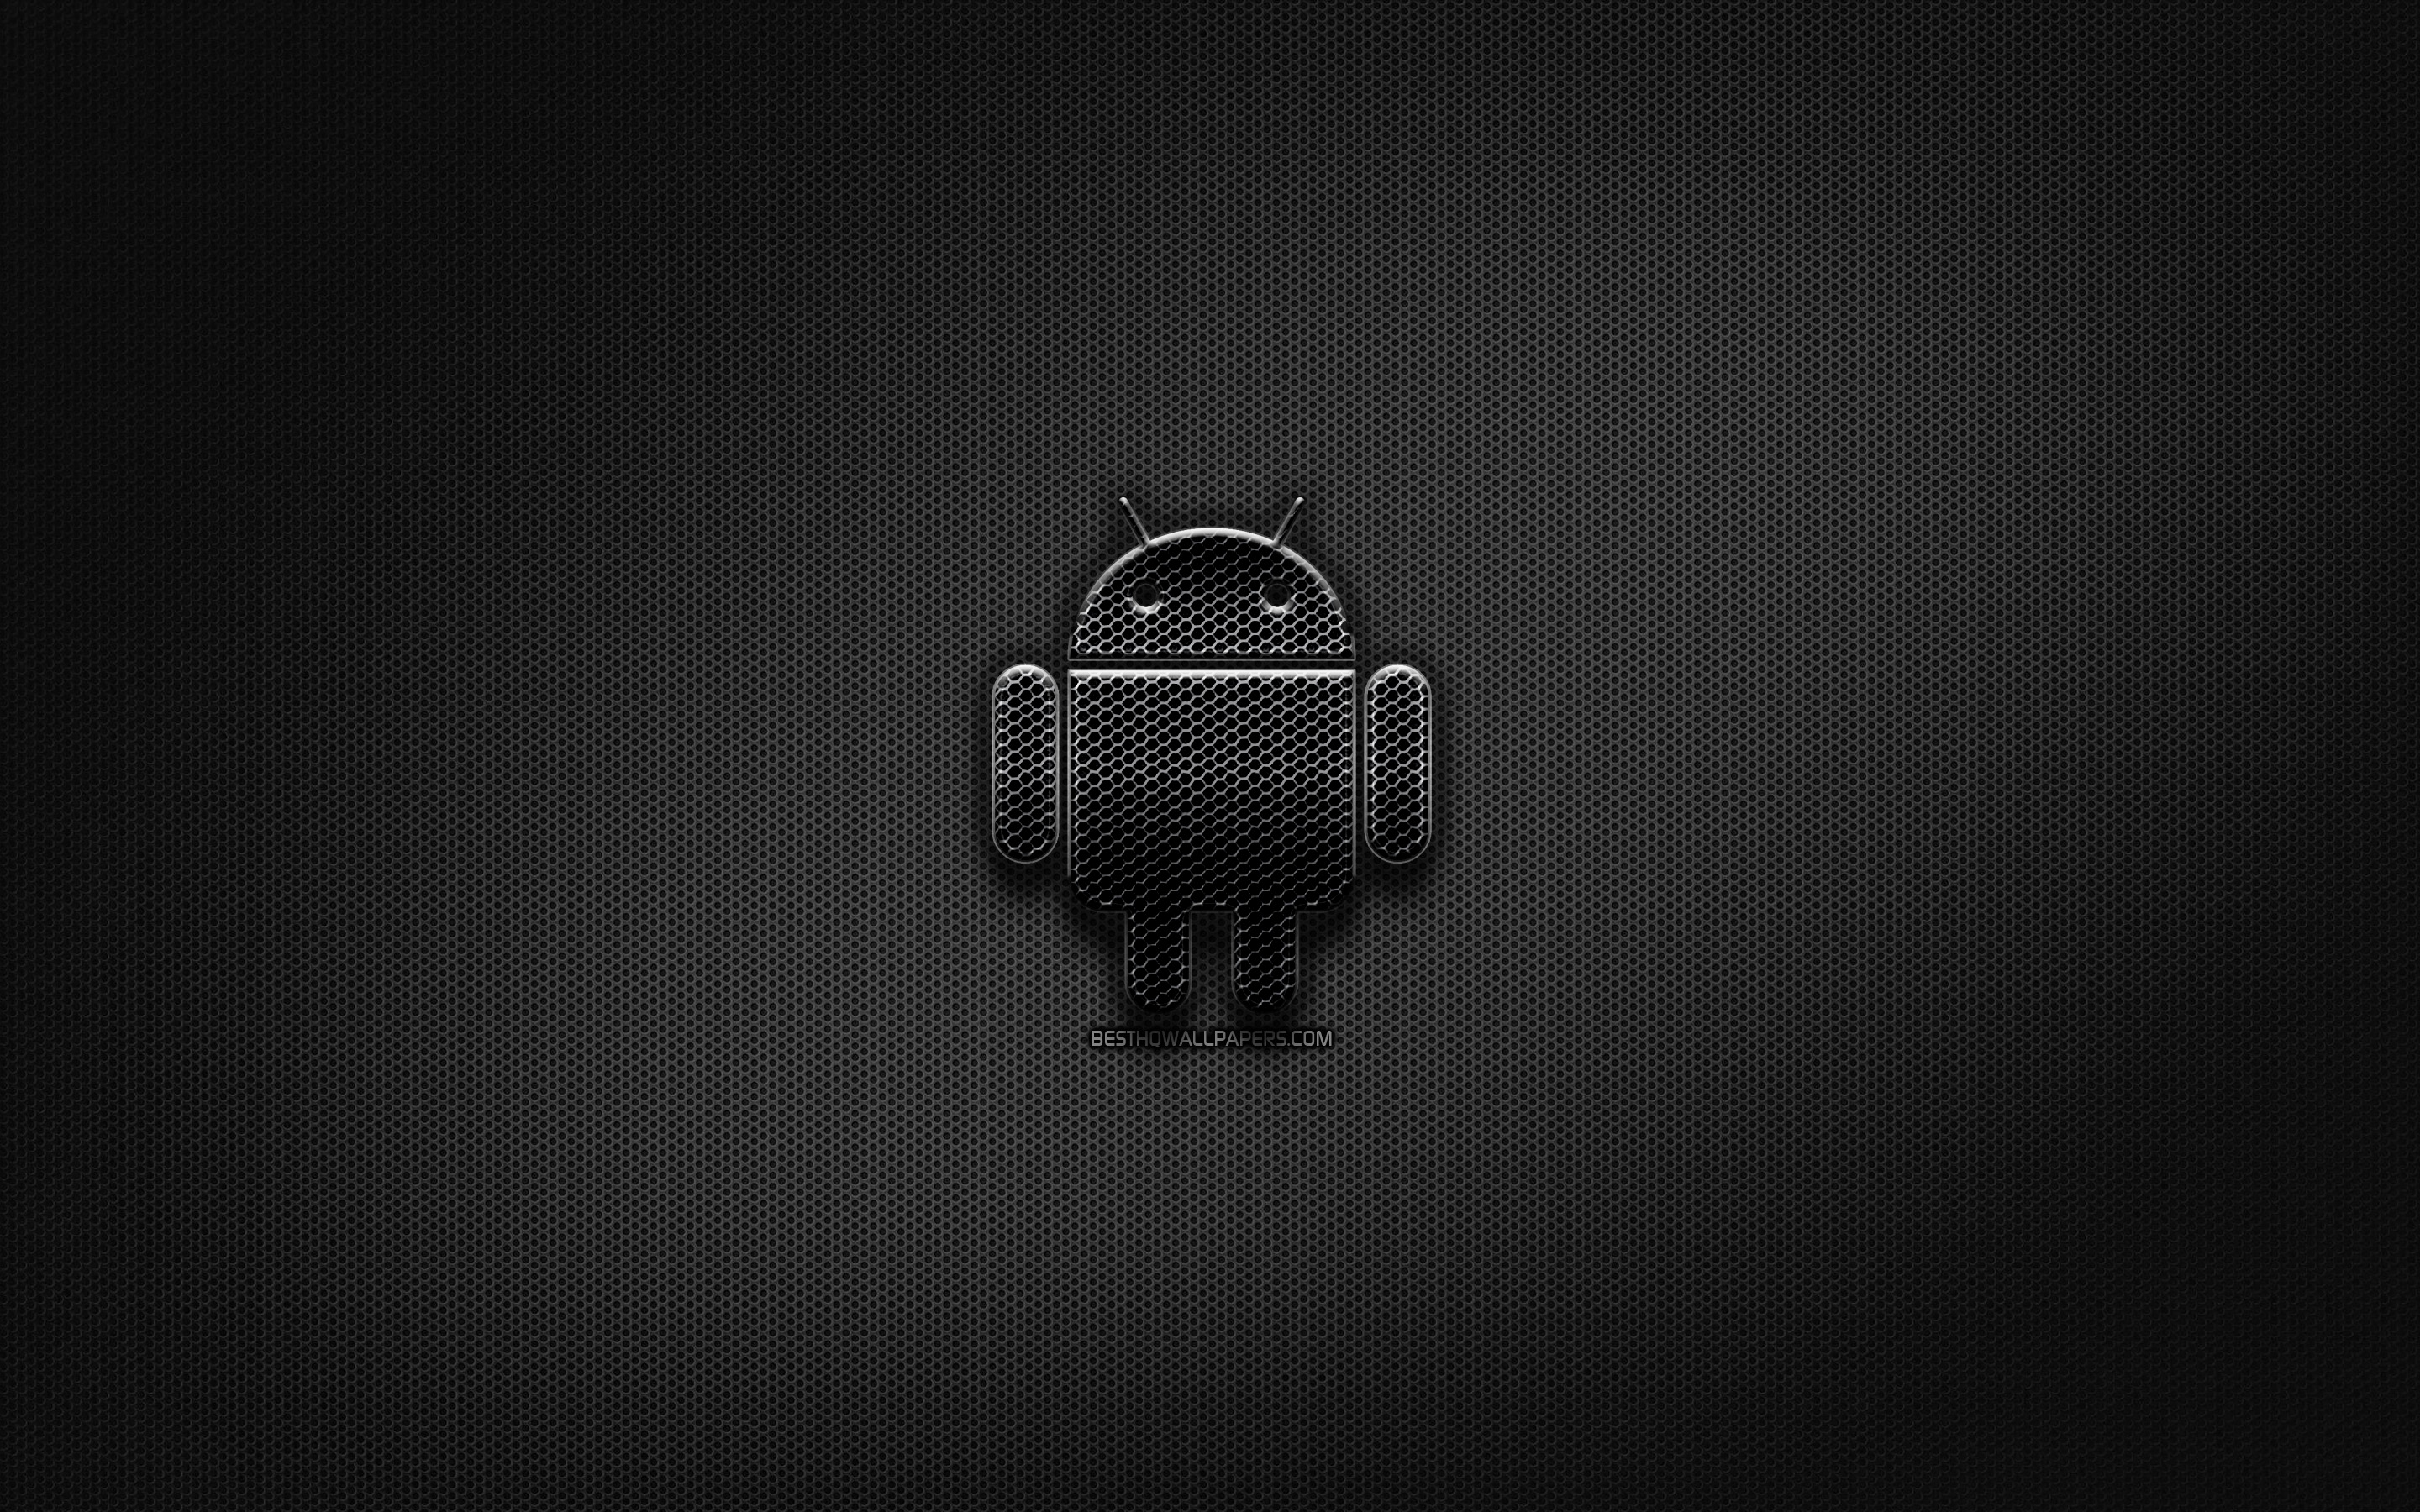 Download wallpaper Android black logo, creative, metal grid background, Android logo, brands, Android for desktop with resolution 2880x1800. High Quality HD picture wallpaper